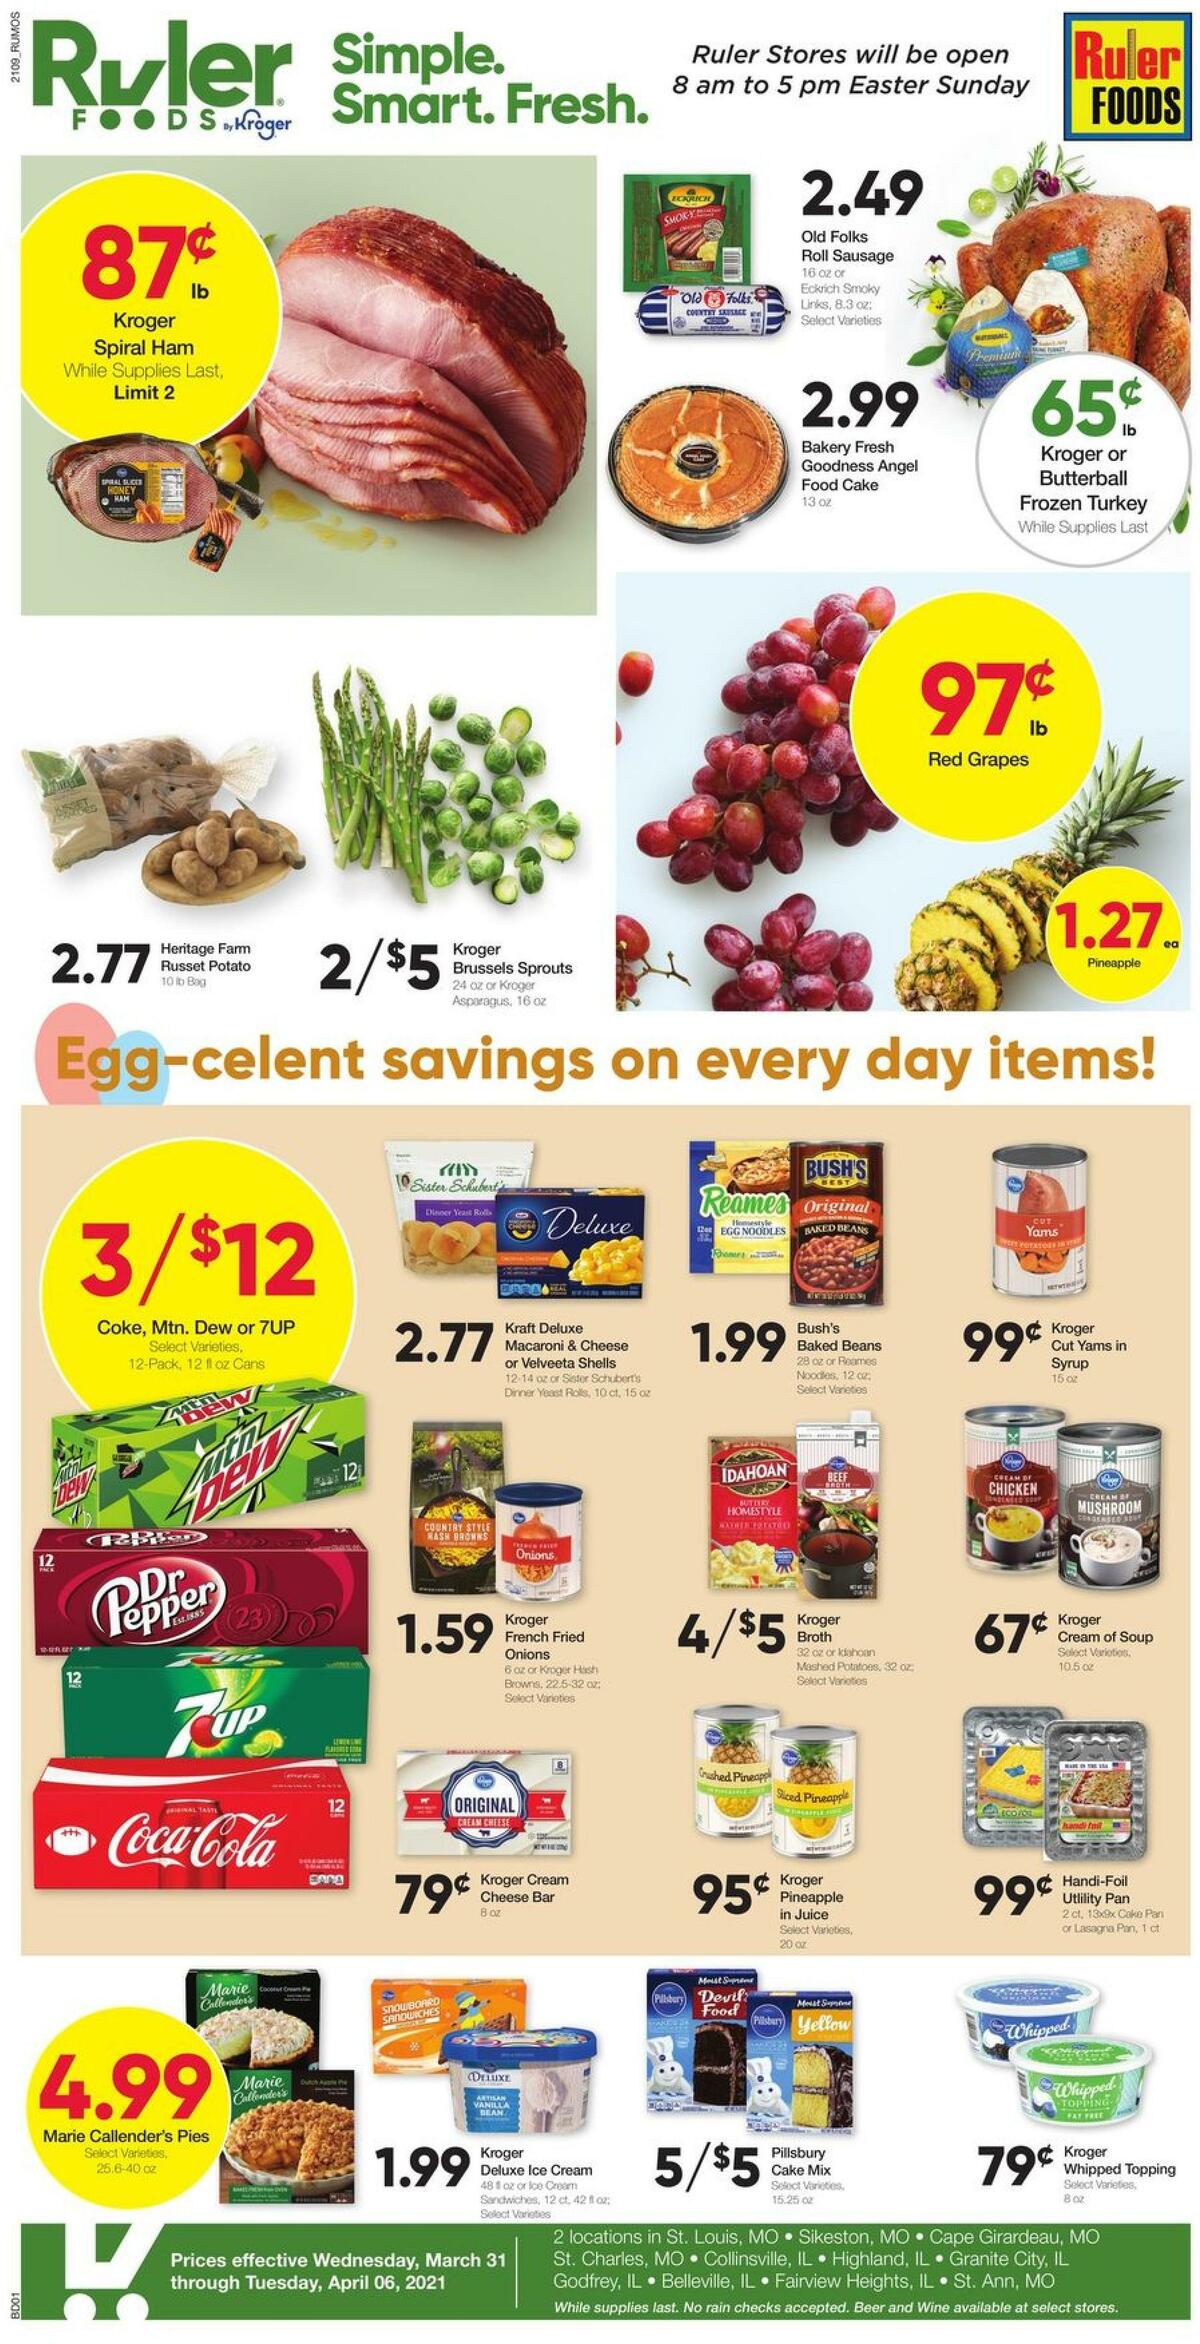 Ruler Foods Weekly Ad from March 31